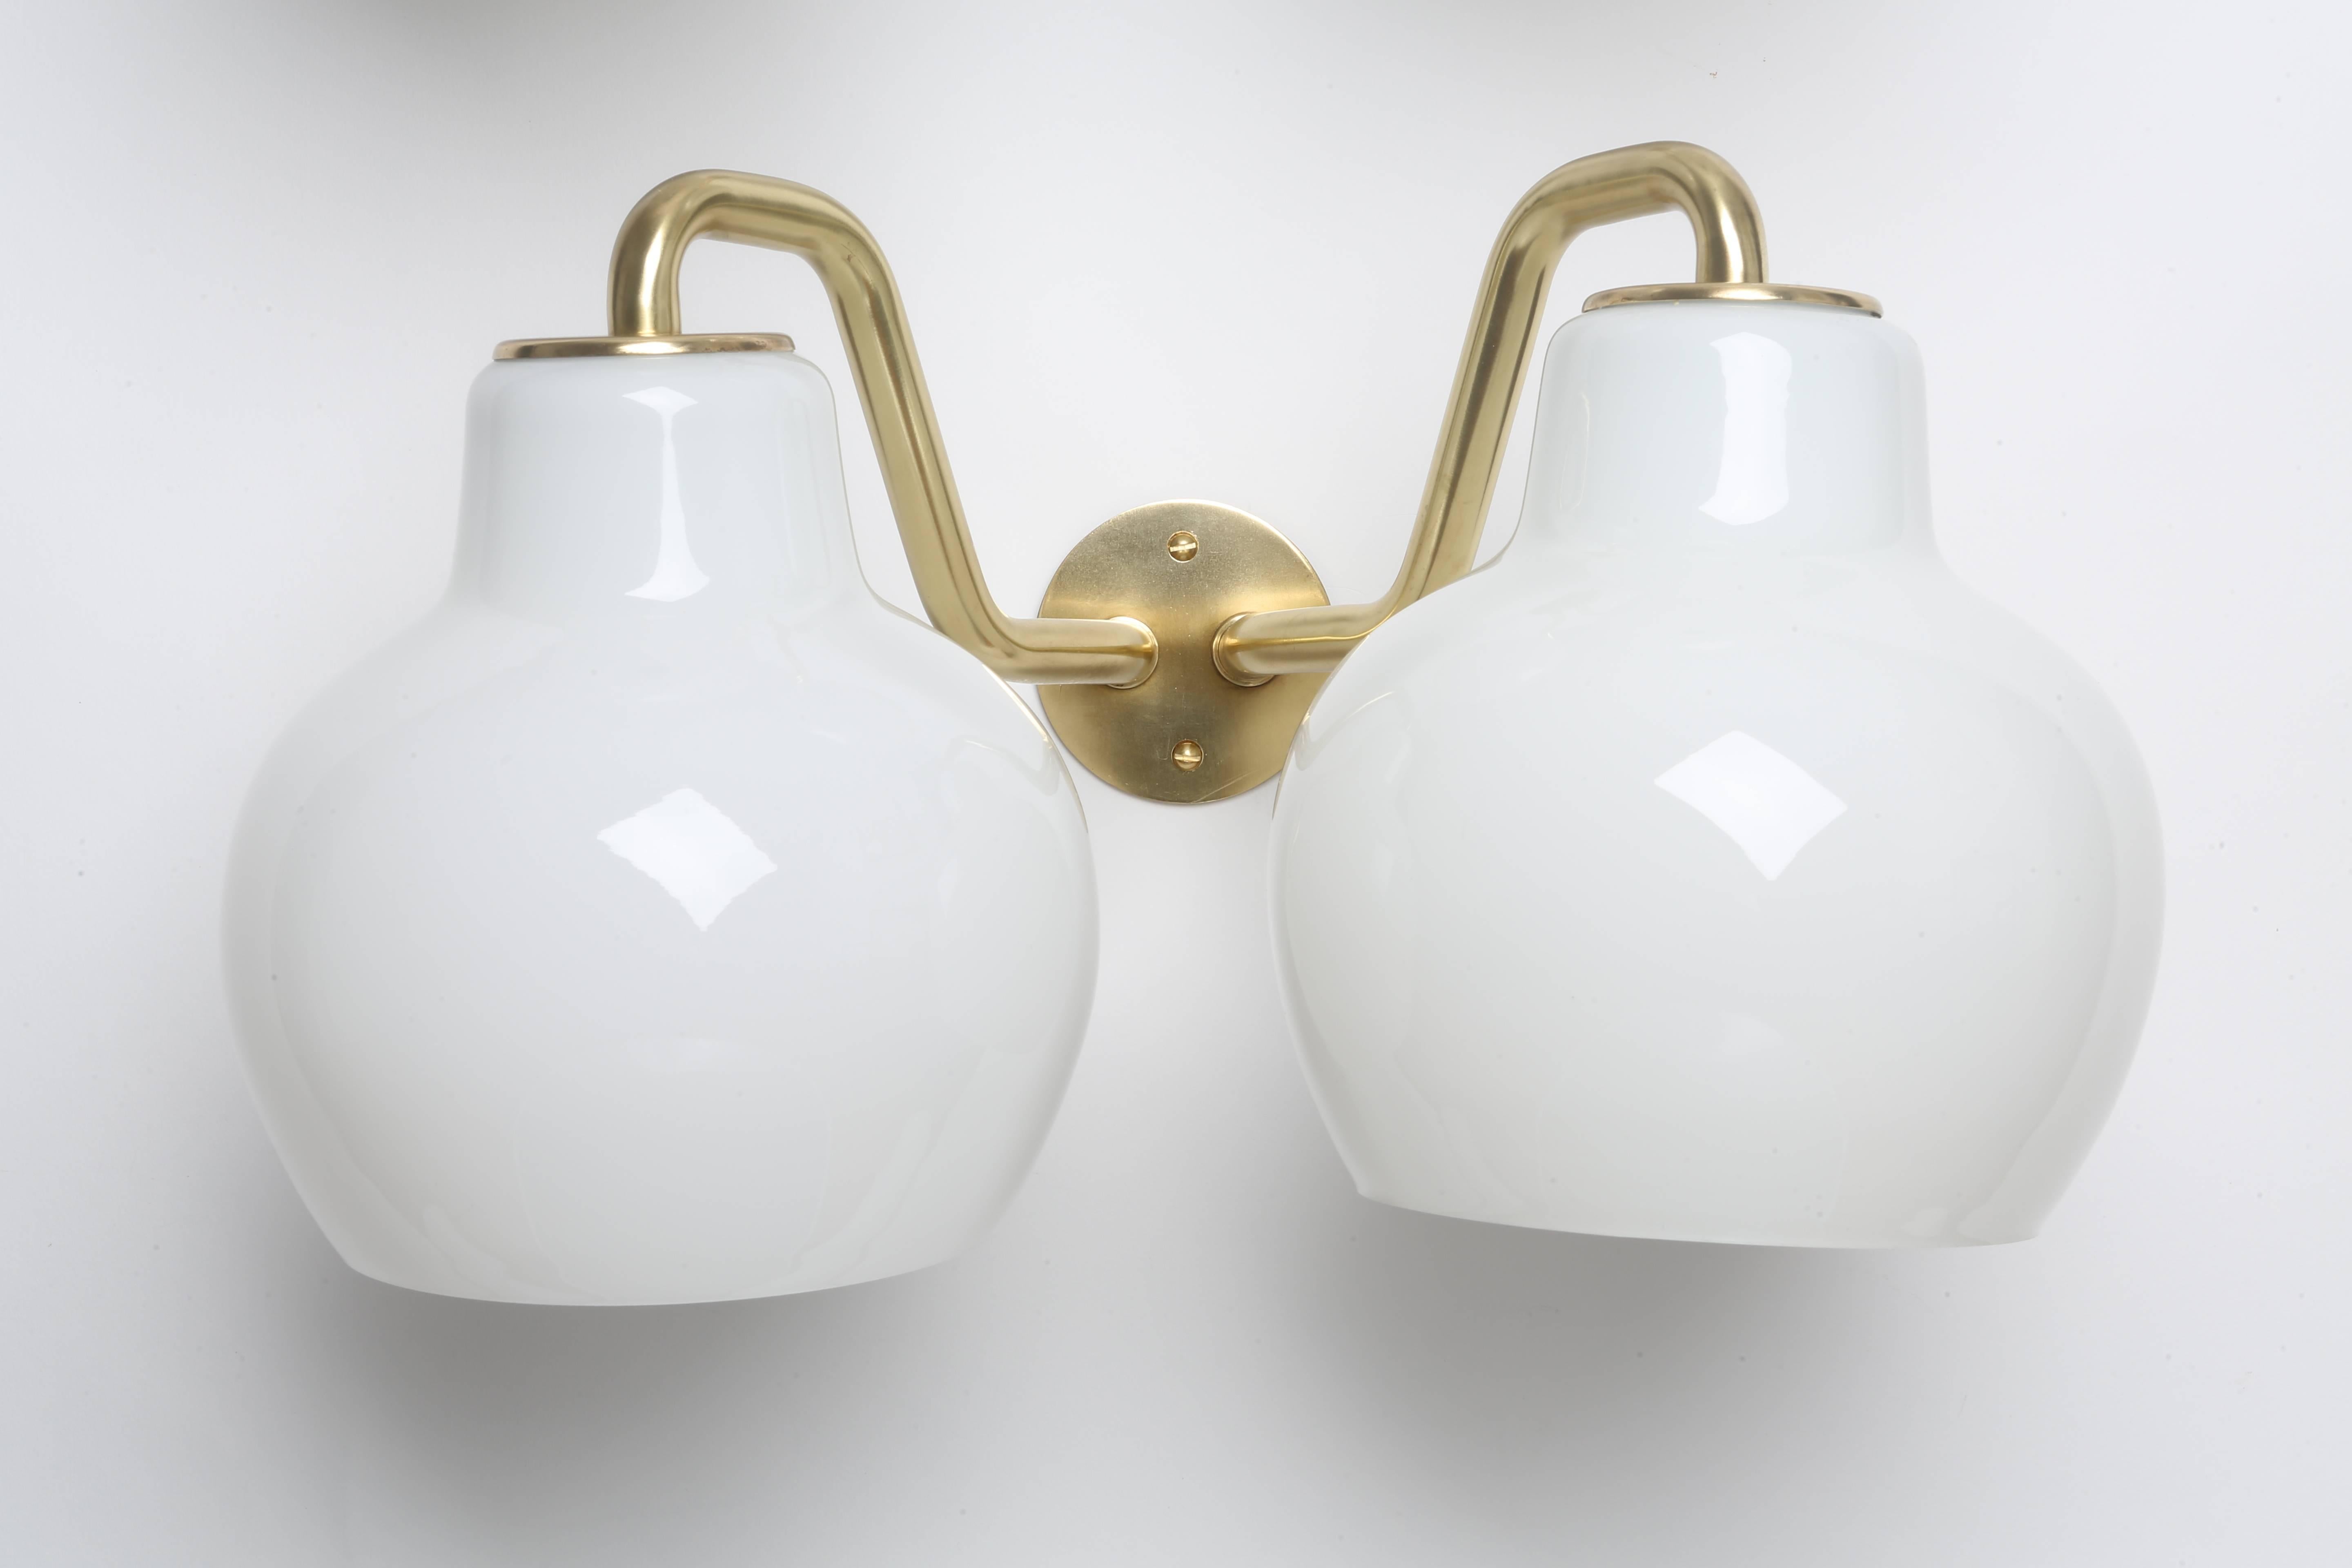 A pair of wall lamps designed by Danish architect Vilhelm Lauritzen in 1950s.
Made with brass and opaline glass.

Matching chandelier and ceiling pendants by Vilhelm Lauritzen are also available.